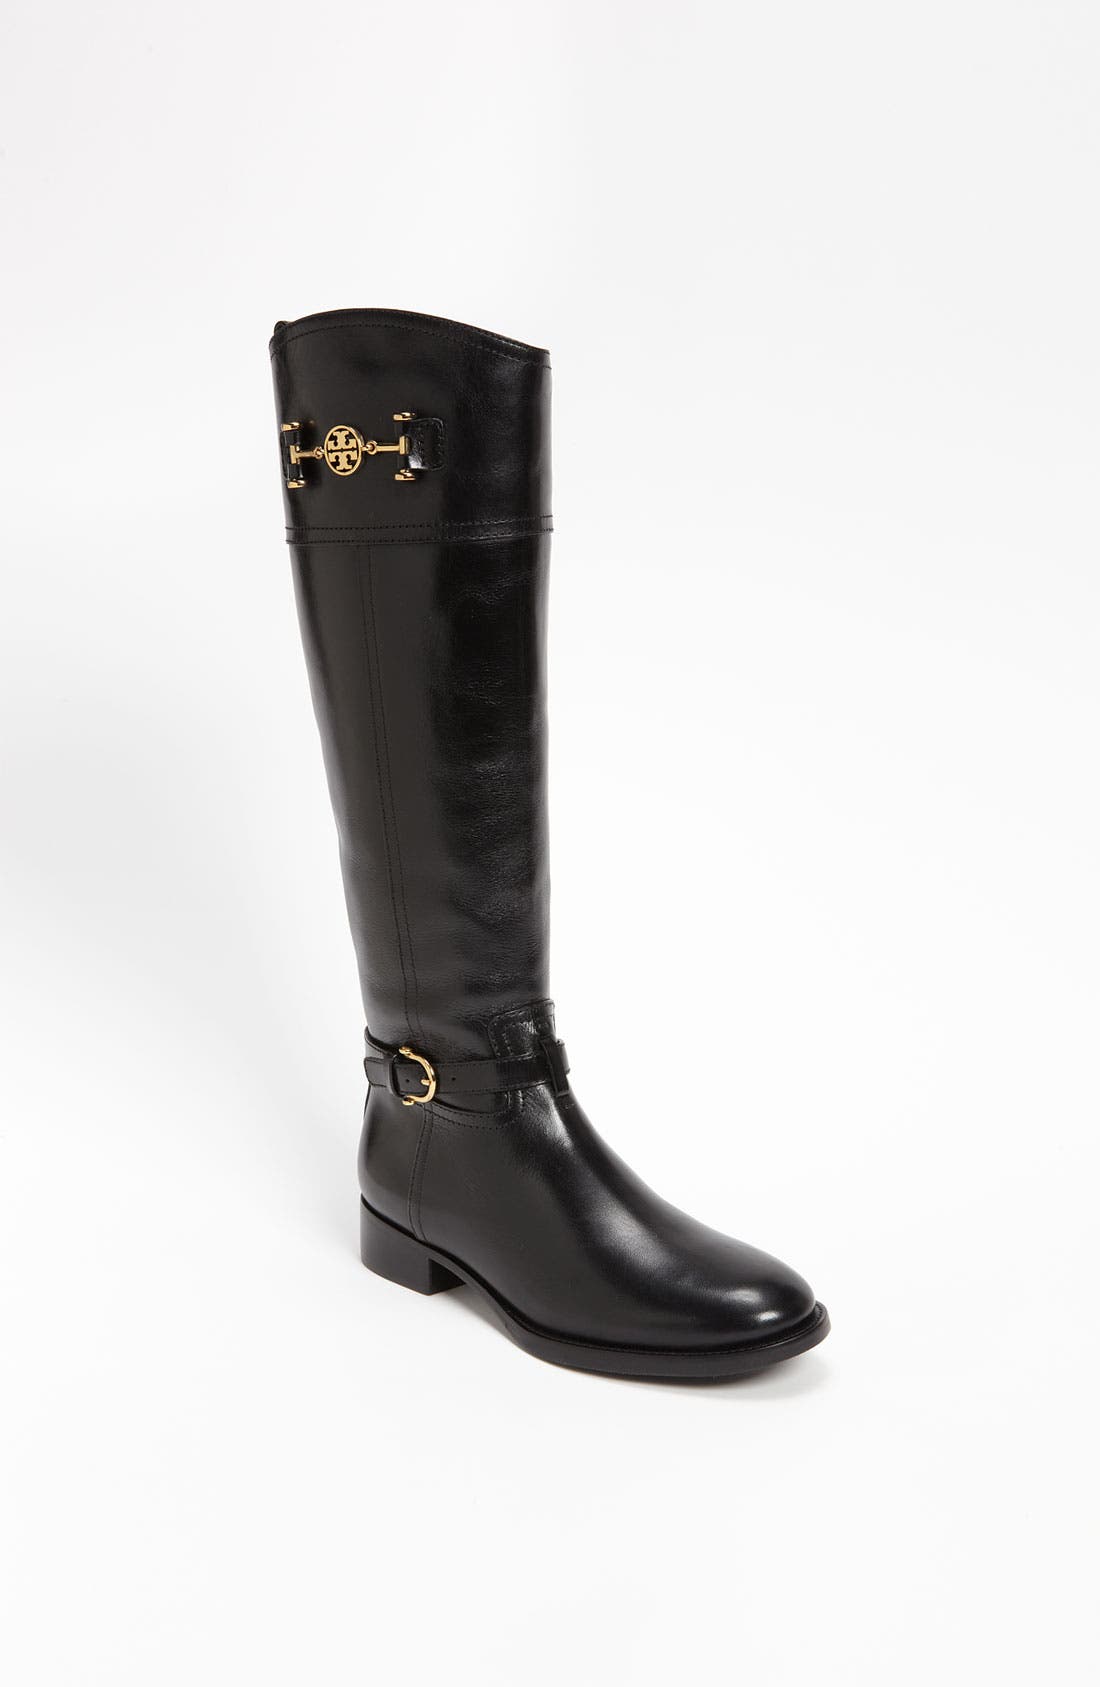 tory burch everly boot